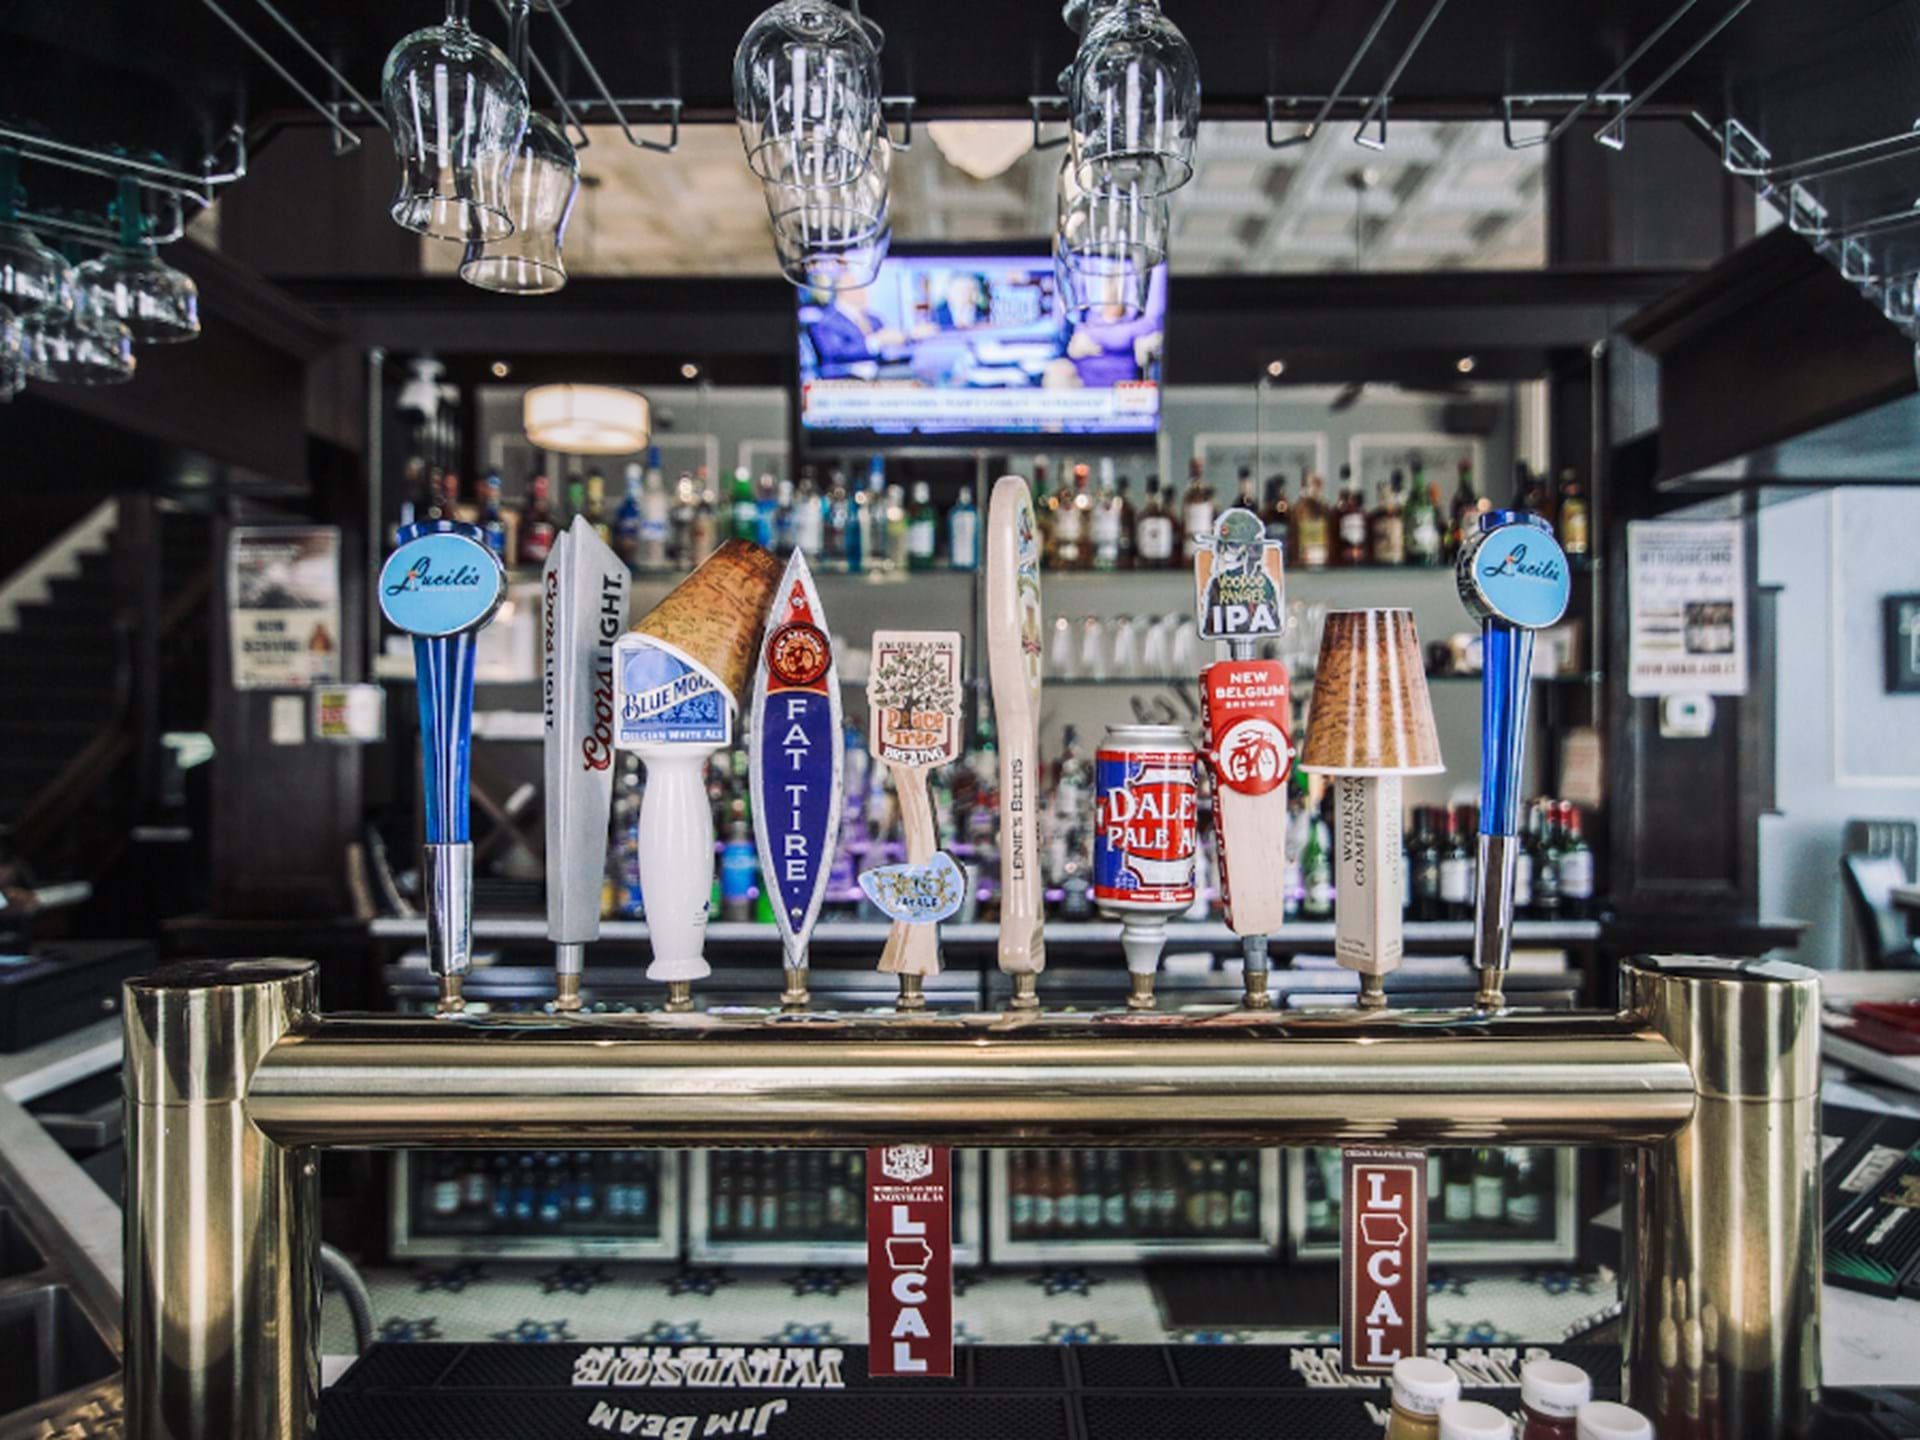 Our bar features a variety of craft beer, wine, and cocktails.